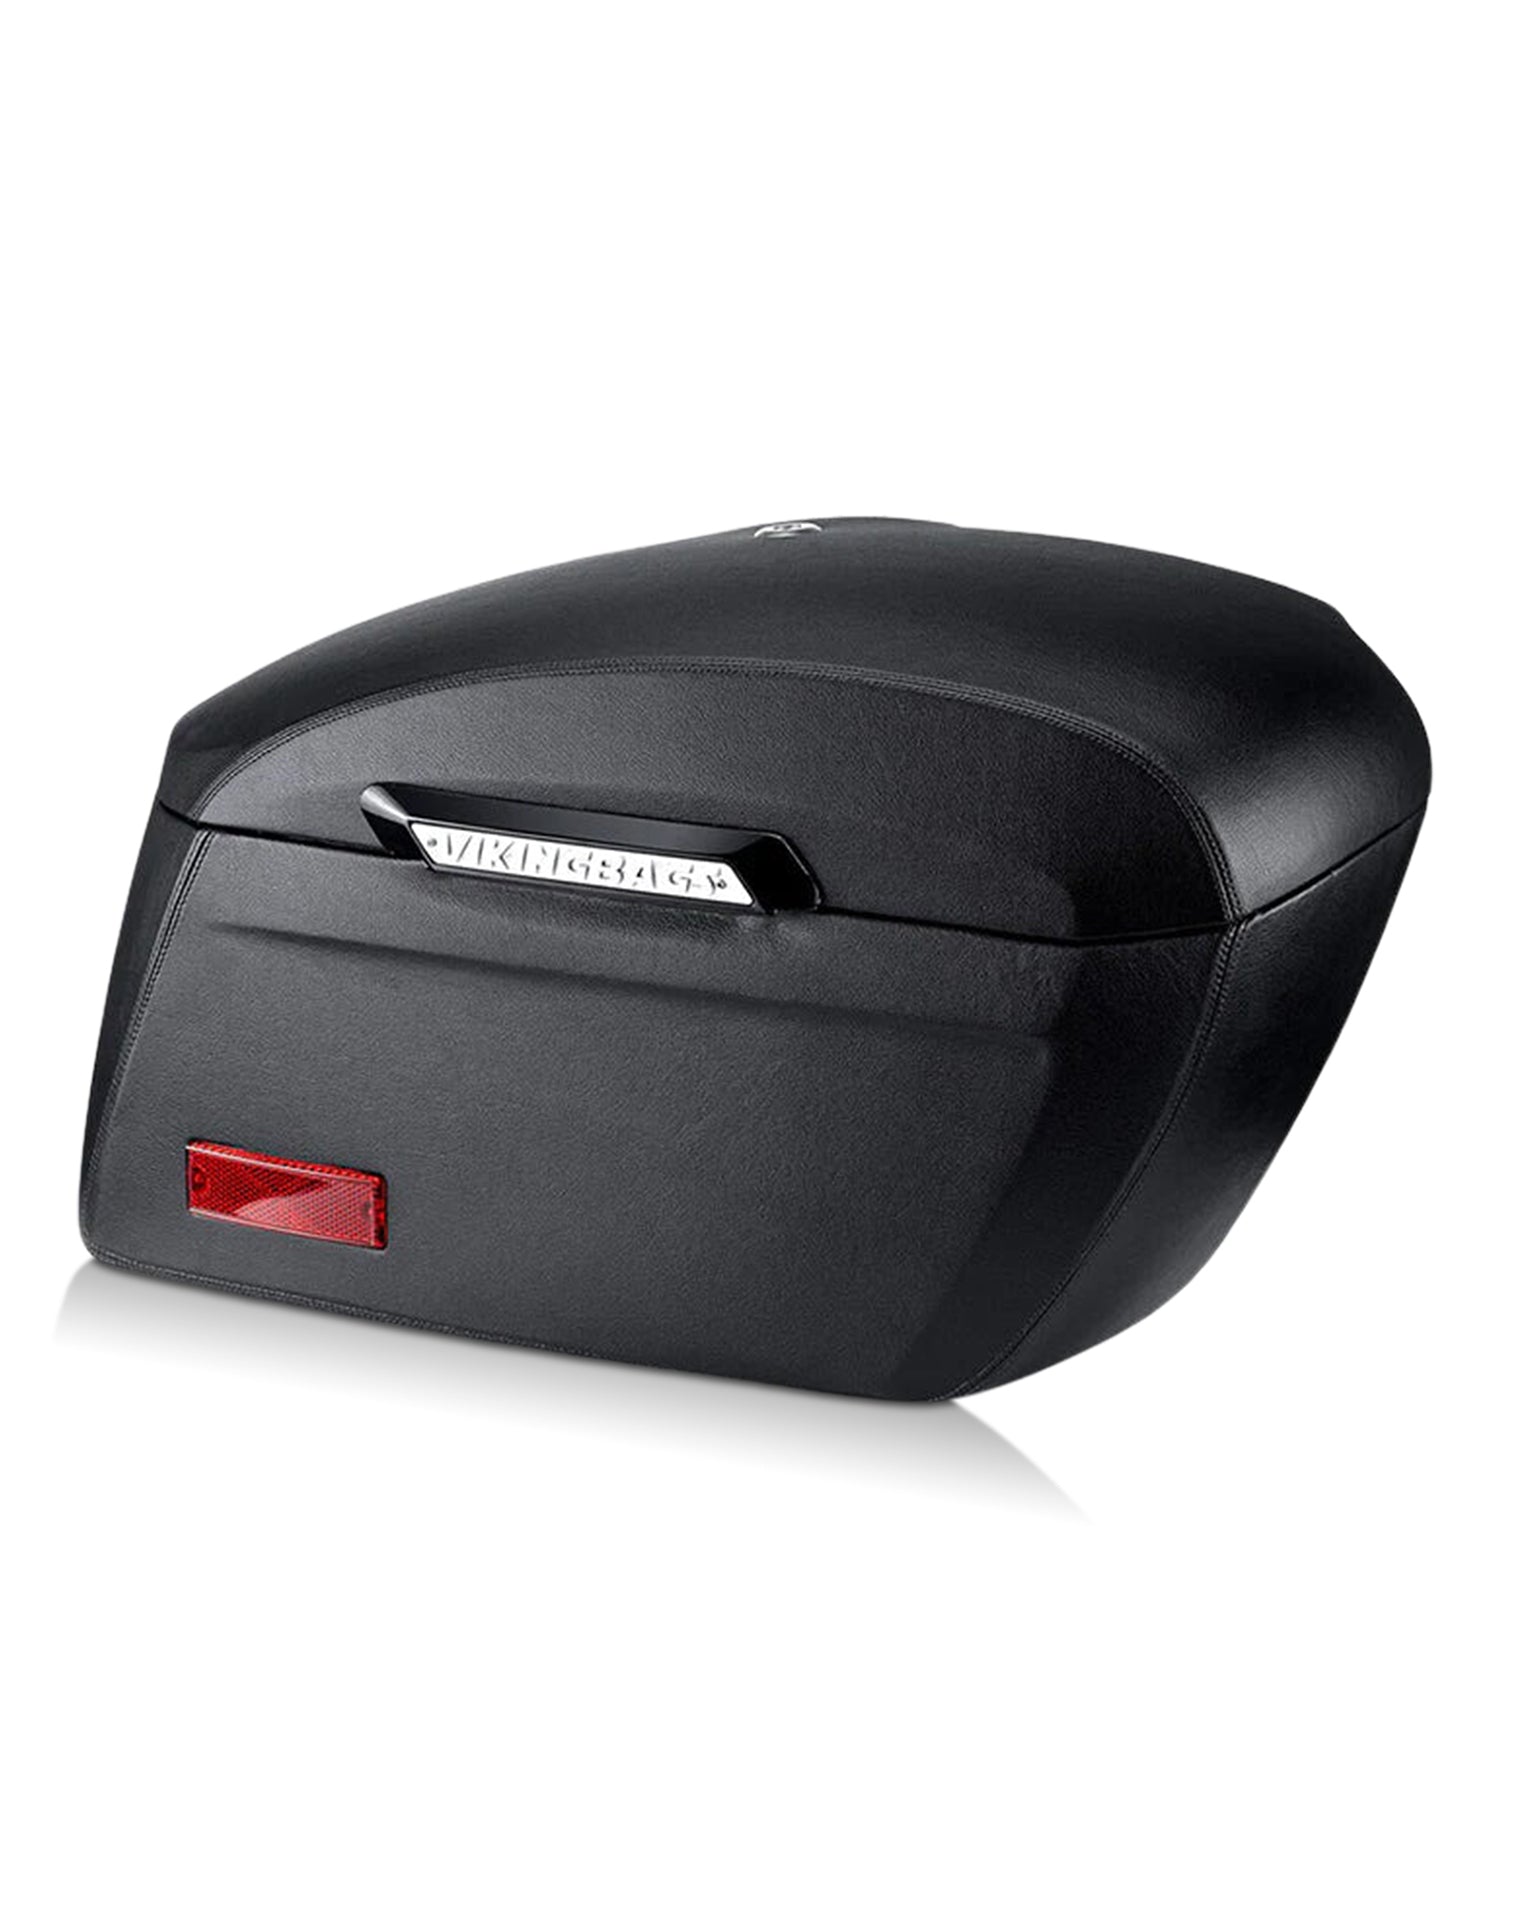 38L Lamellar Vale Extra Large Shock Cut-out Honda VTX 1300 C Leather Covered Motorcycle Hard Saddlebags Main View